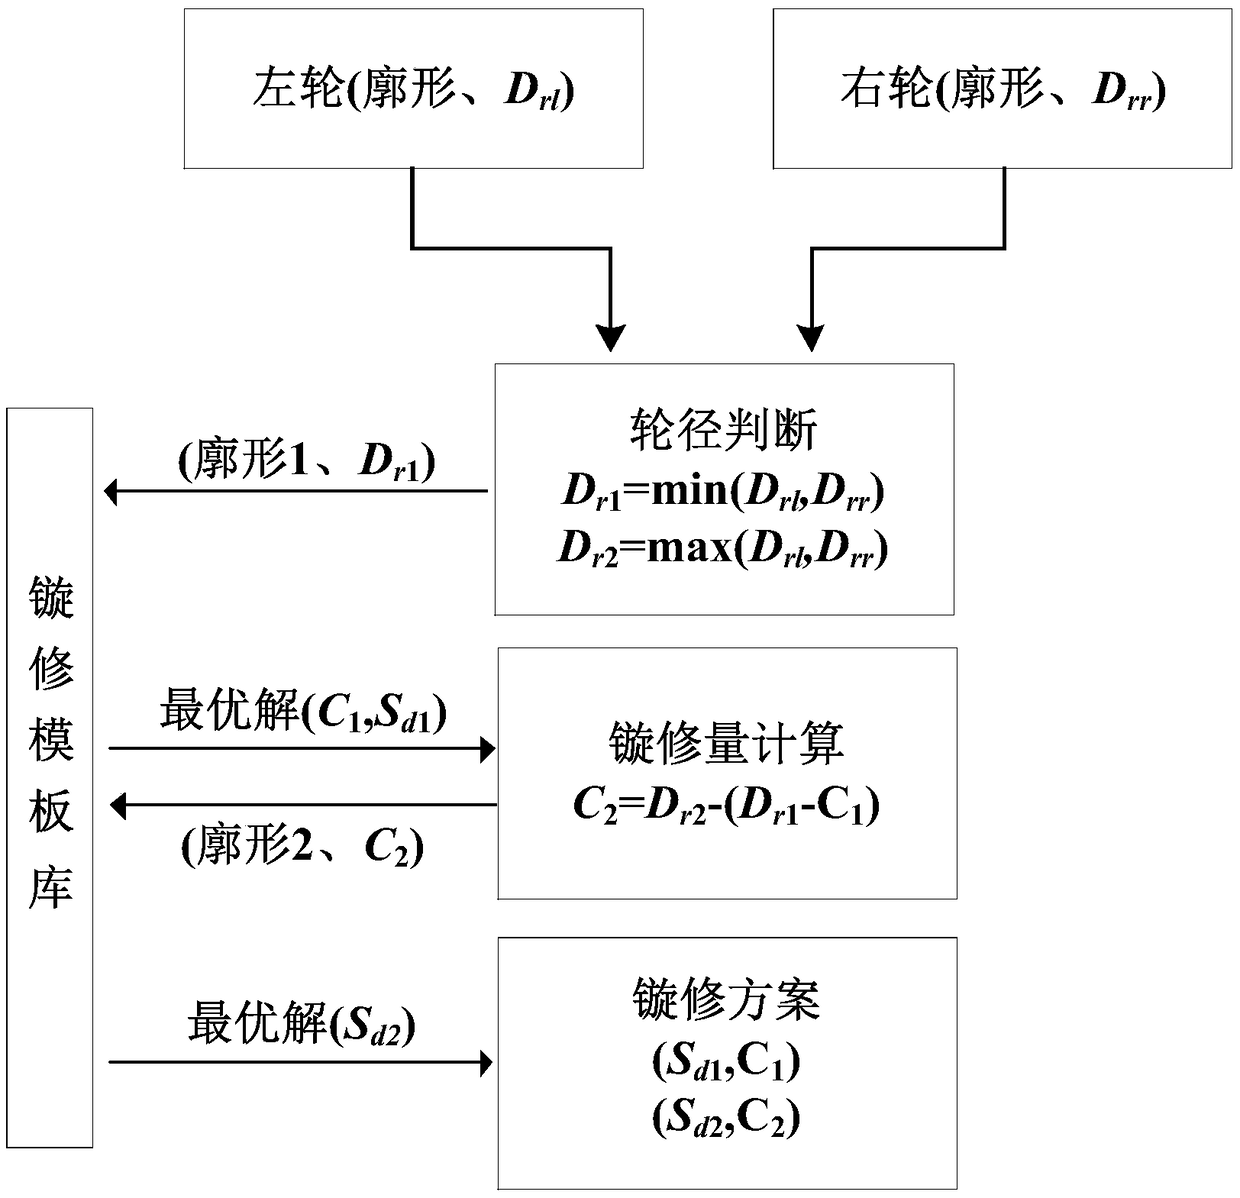 A decision algorithm of wheel-set upping repair strategy of railway vehicle under the condition of no wheel drop